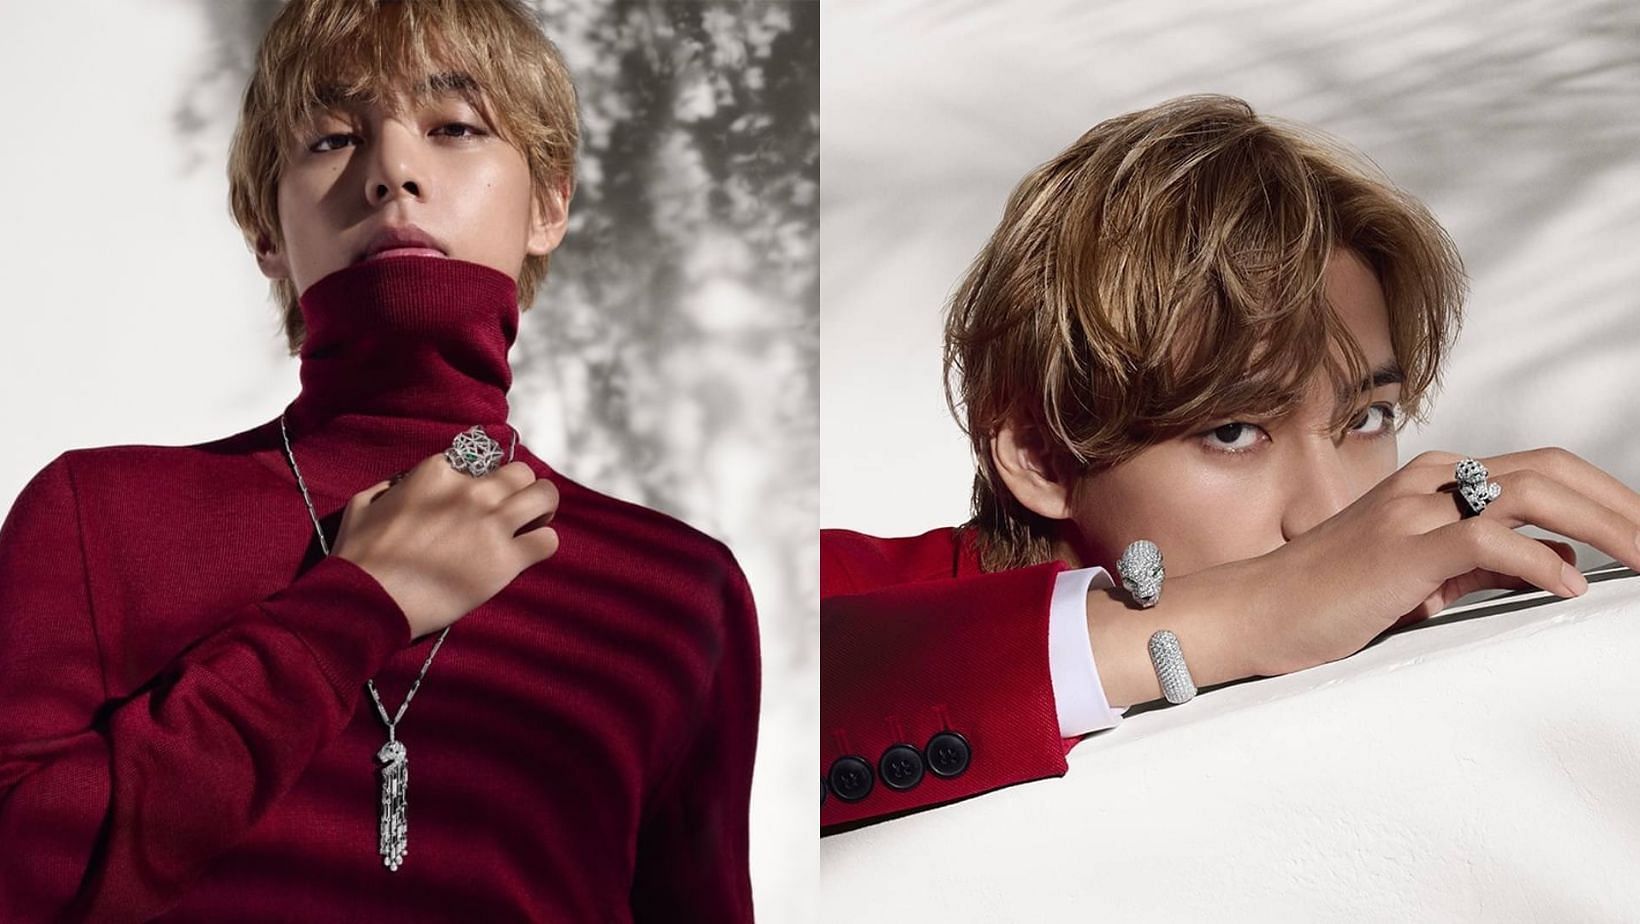 BTS' V stuns the internet with a new partnership with luxury brand Cartier  - Entertainment